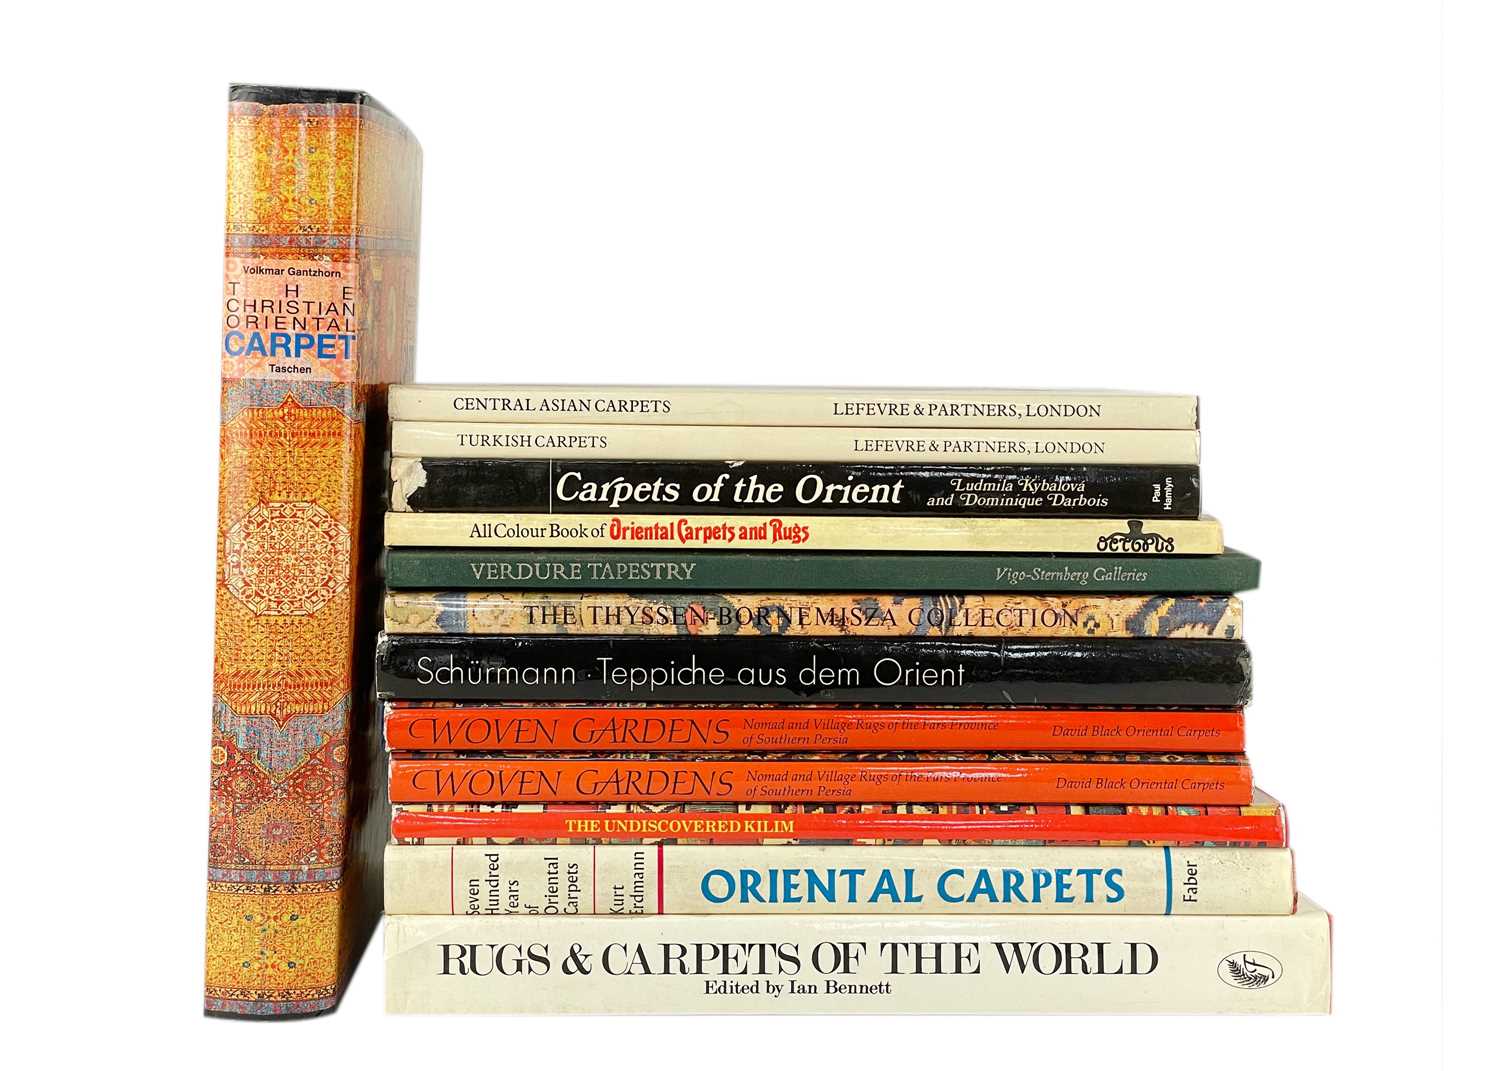 Thirteen books relating to antique rugs and carpets.